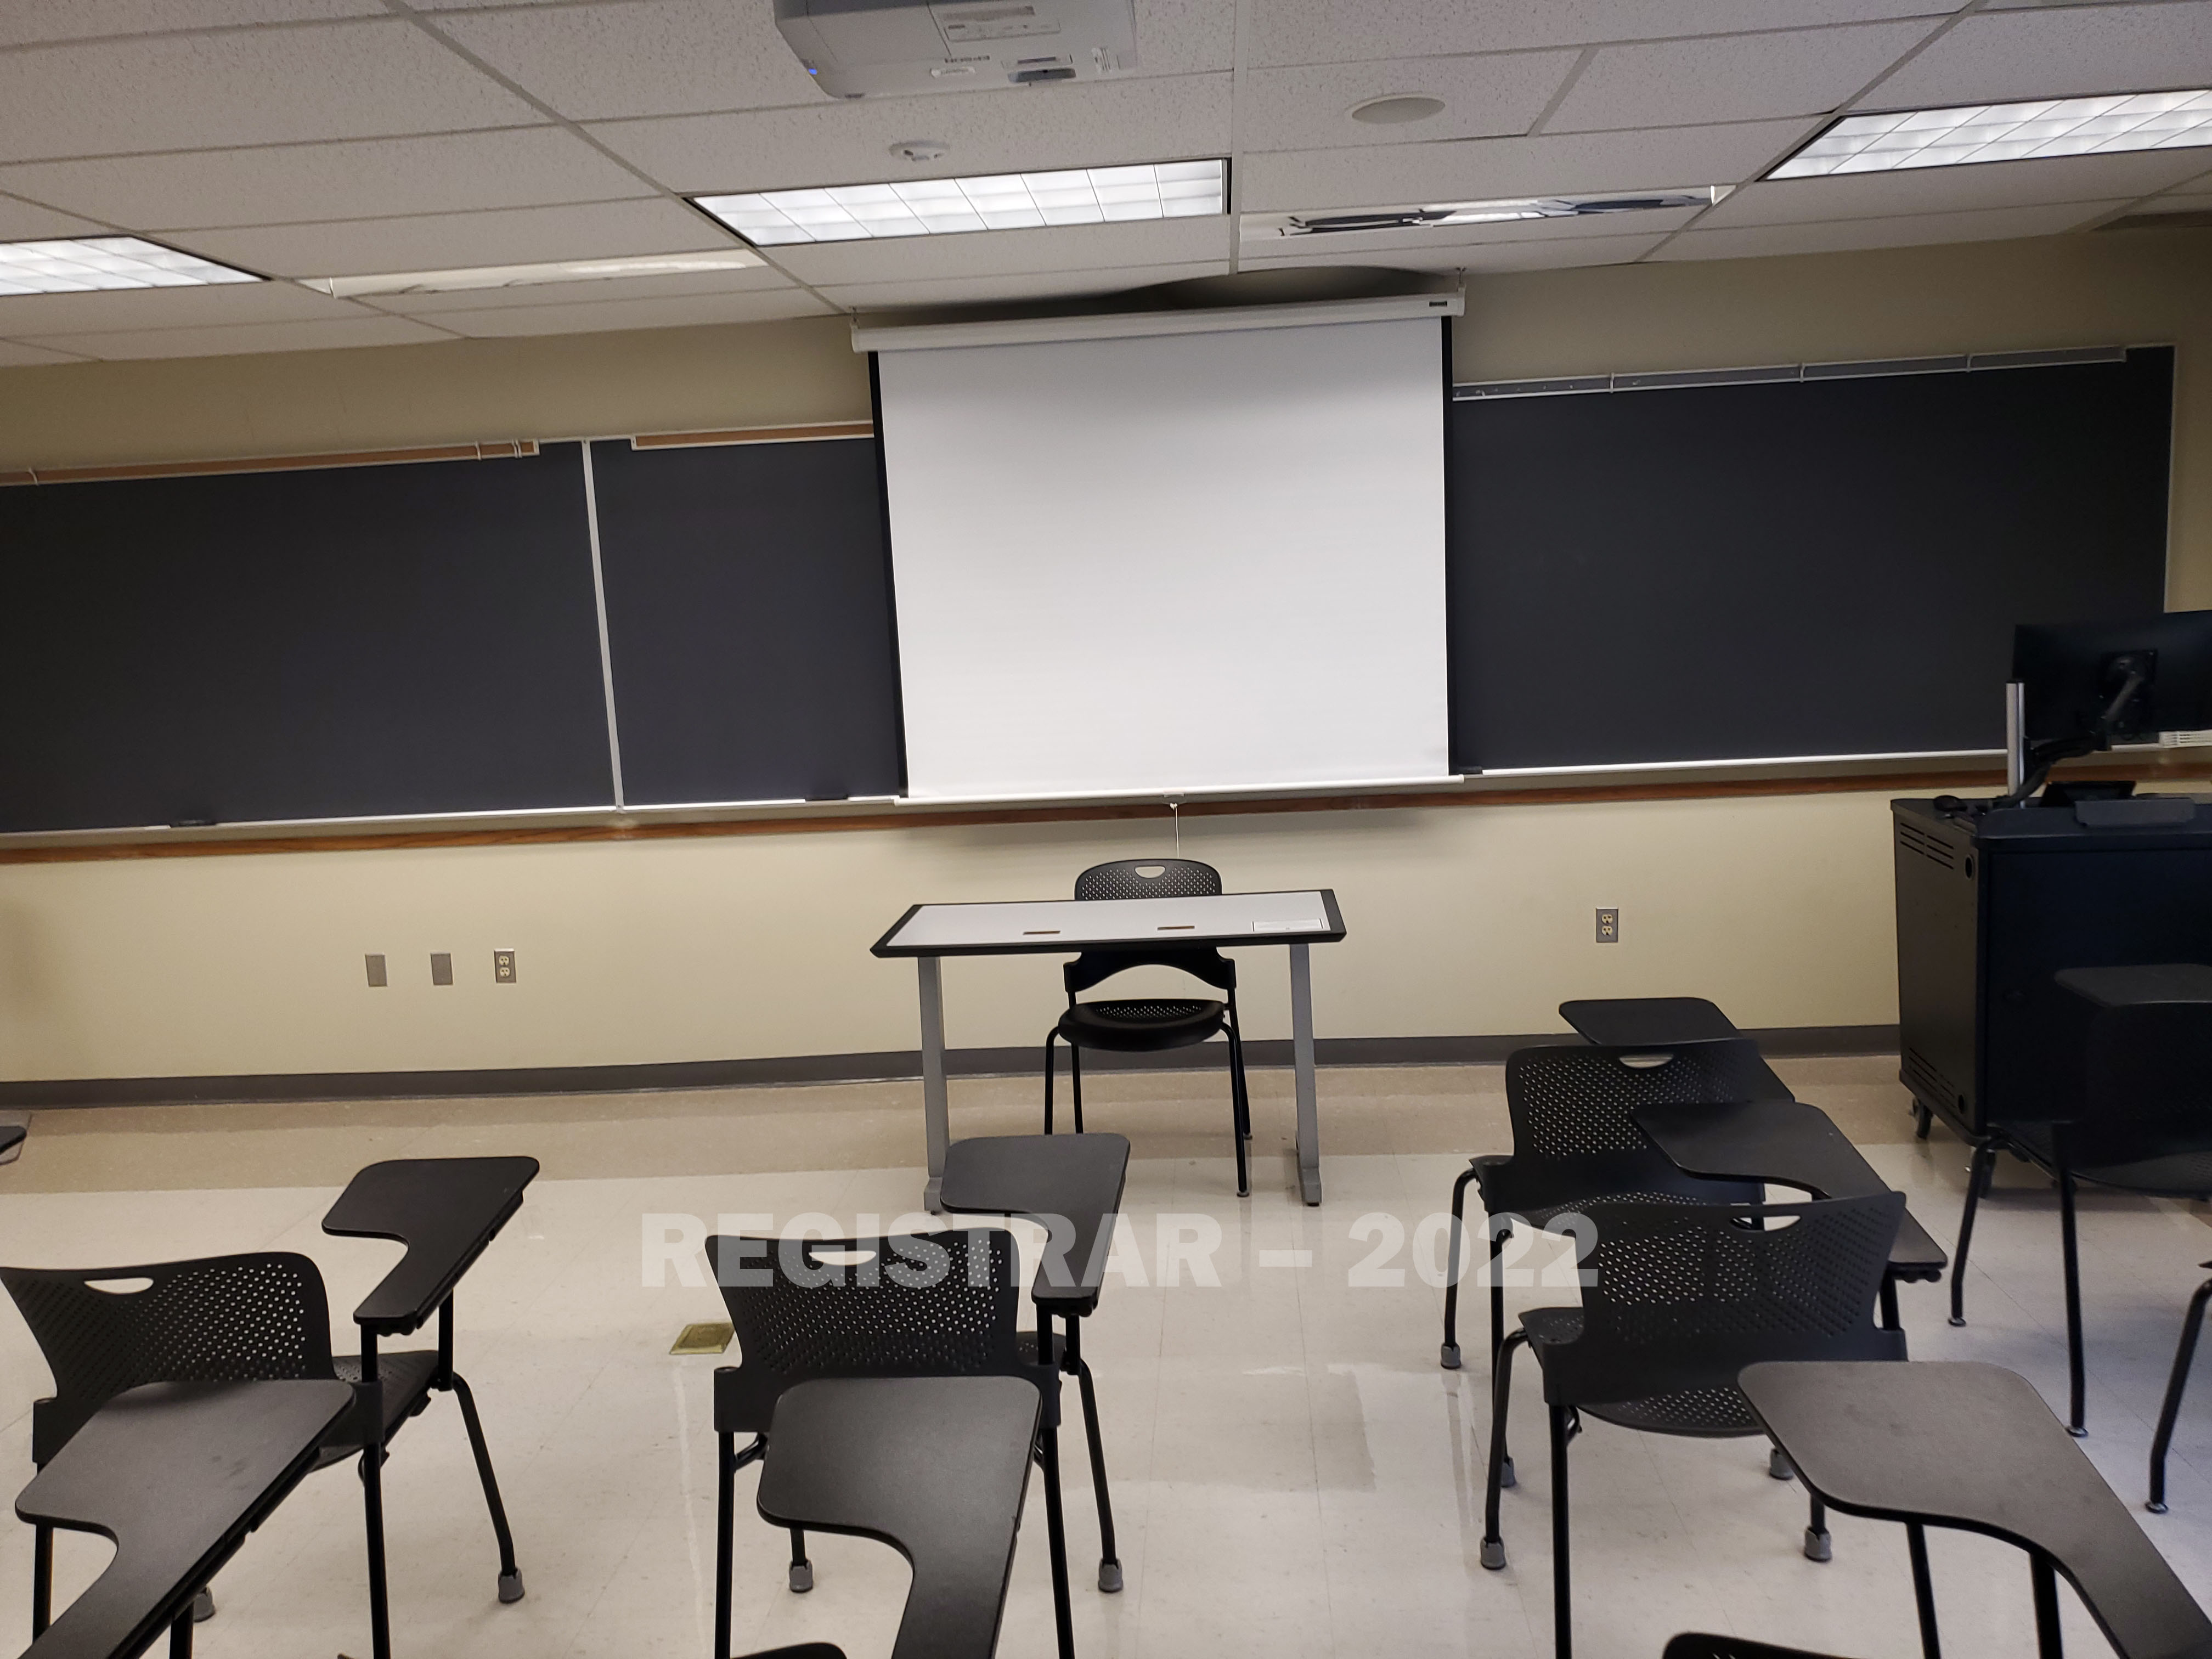 Enarson Classroom Building room 254 view from the back of the room with projector screen down